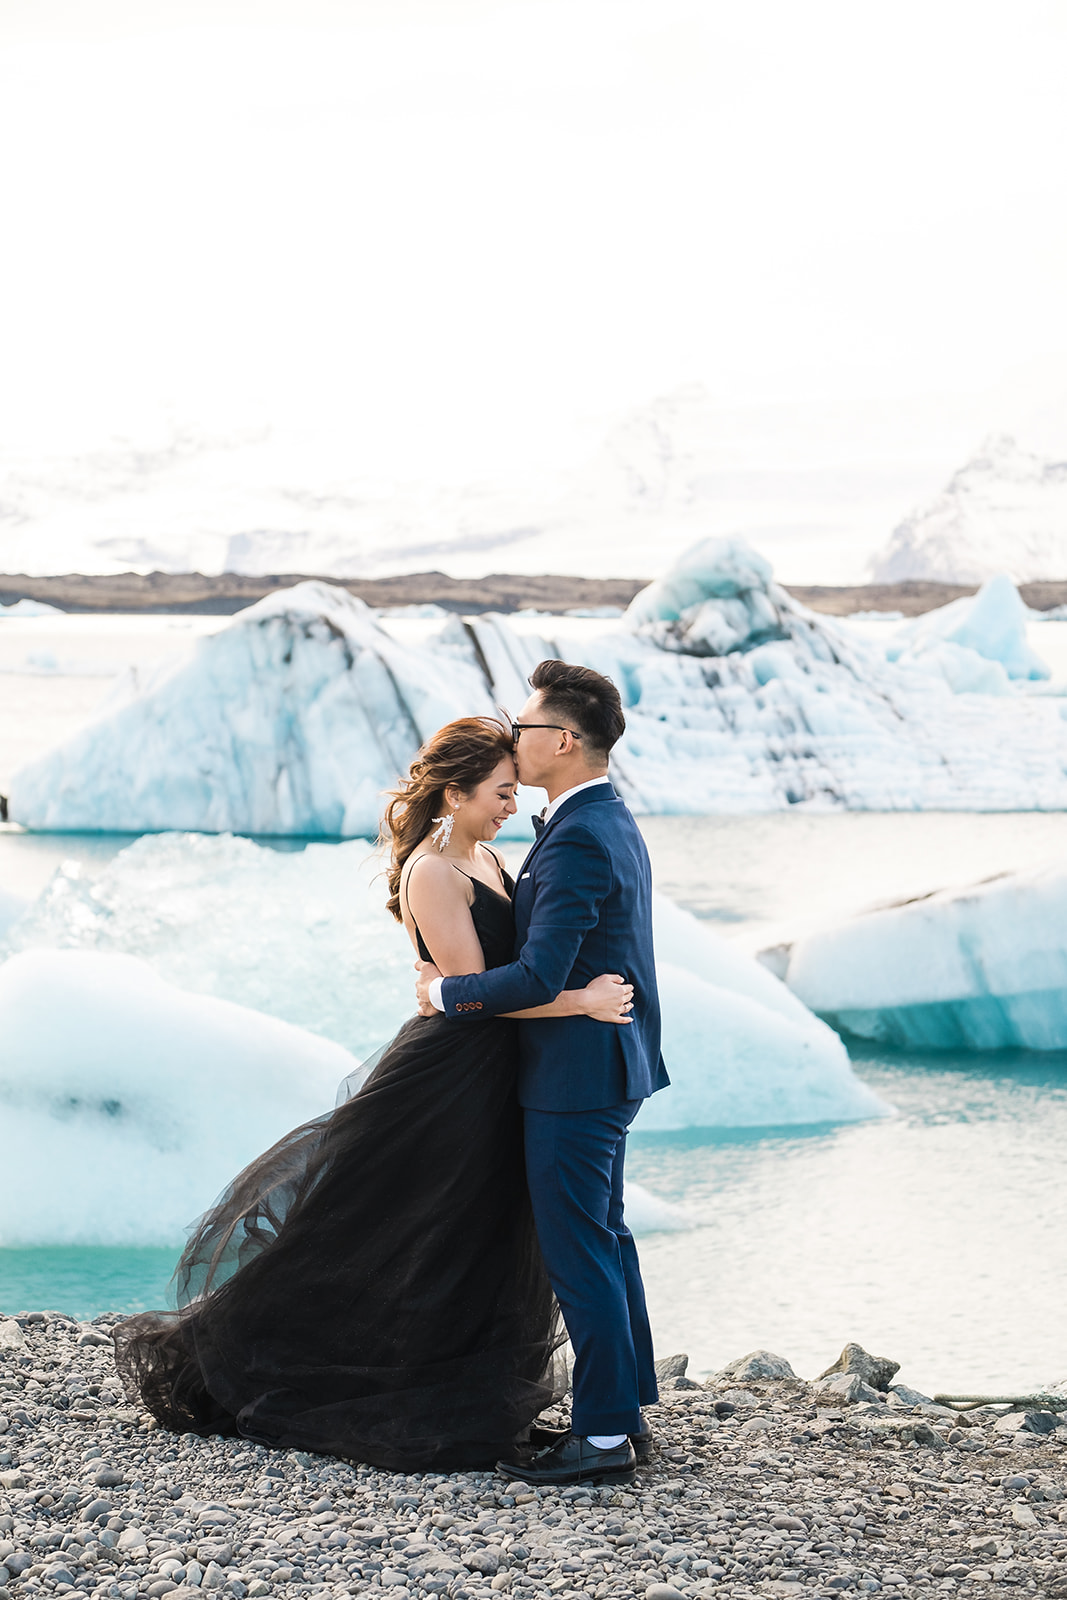 A couple standing in front of Icebergs Pre-wedding Adventure Session at Jökulsárlón Glacier Lagoon Iceland black dress